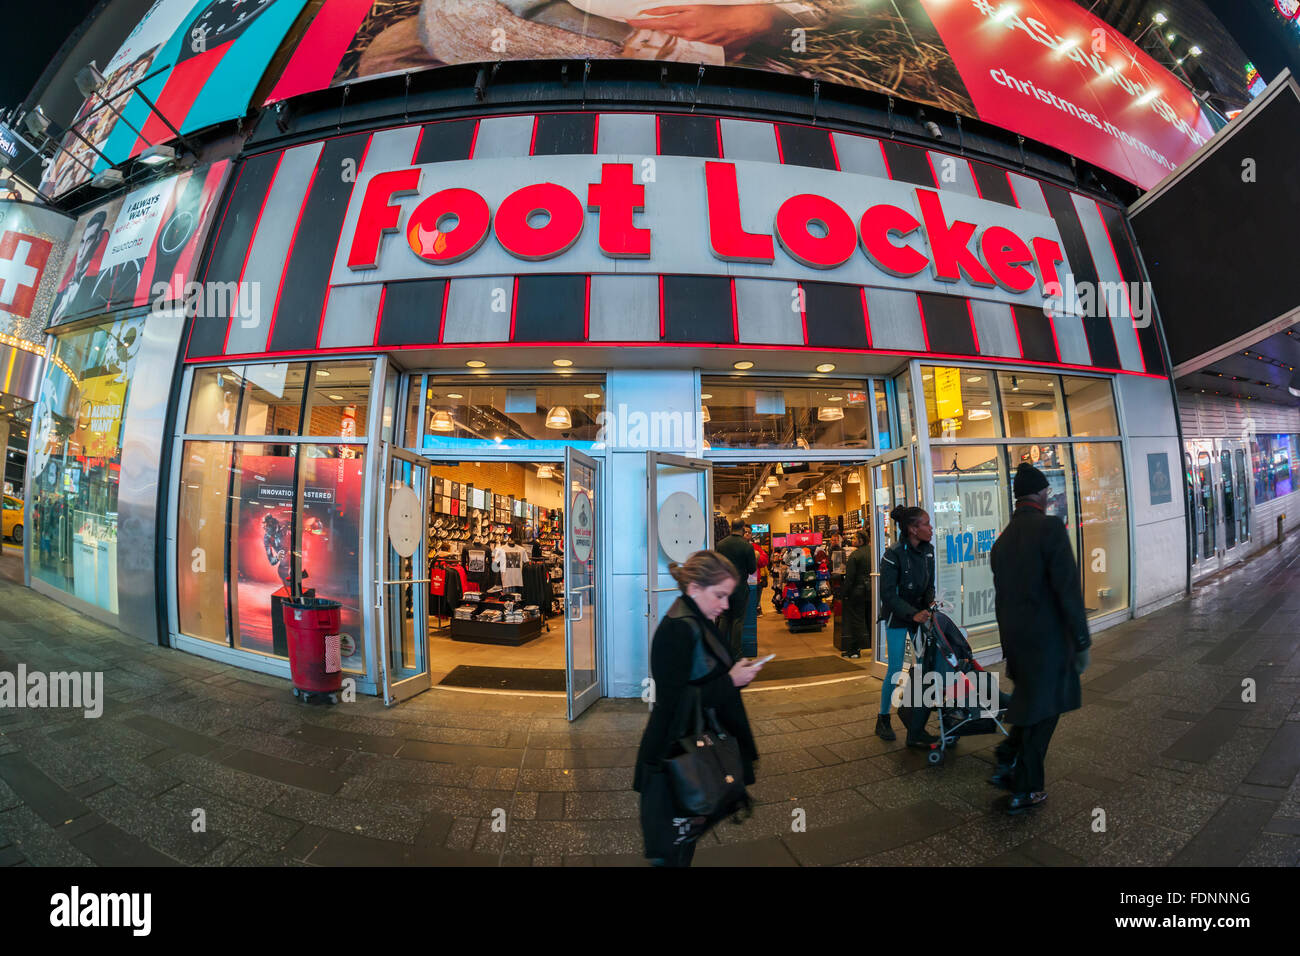 A Foot Locker store in Times Square in New York is seen on Tuesday, January 26, 2016.  The store will close, along with Toys R Us (already closed), Swatch and other tenants as 1514 Broadway replaces its original tenants dating back to the restoration of Times Square. The retail spaces will be occupied by Gap and Old Navy. Toys R Us, from 2000, was paying approximately half of what the property can lease for now. (© Richard B. Levine) Stock Photo